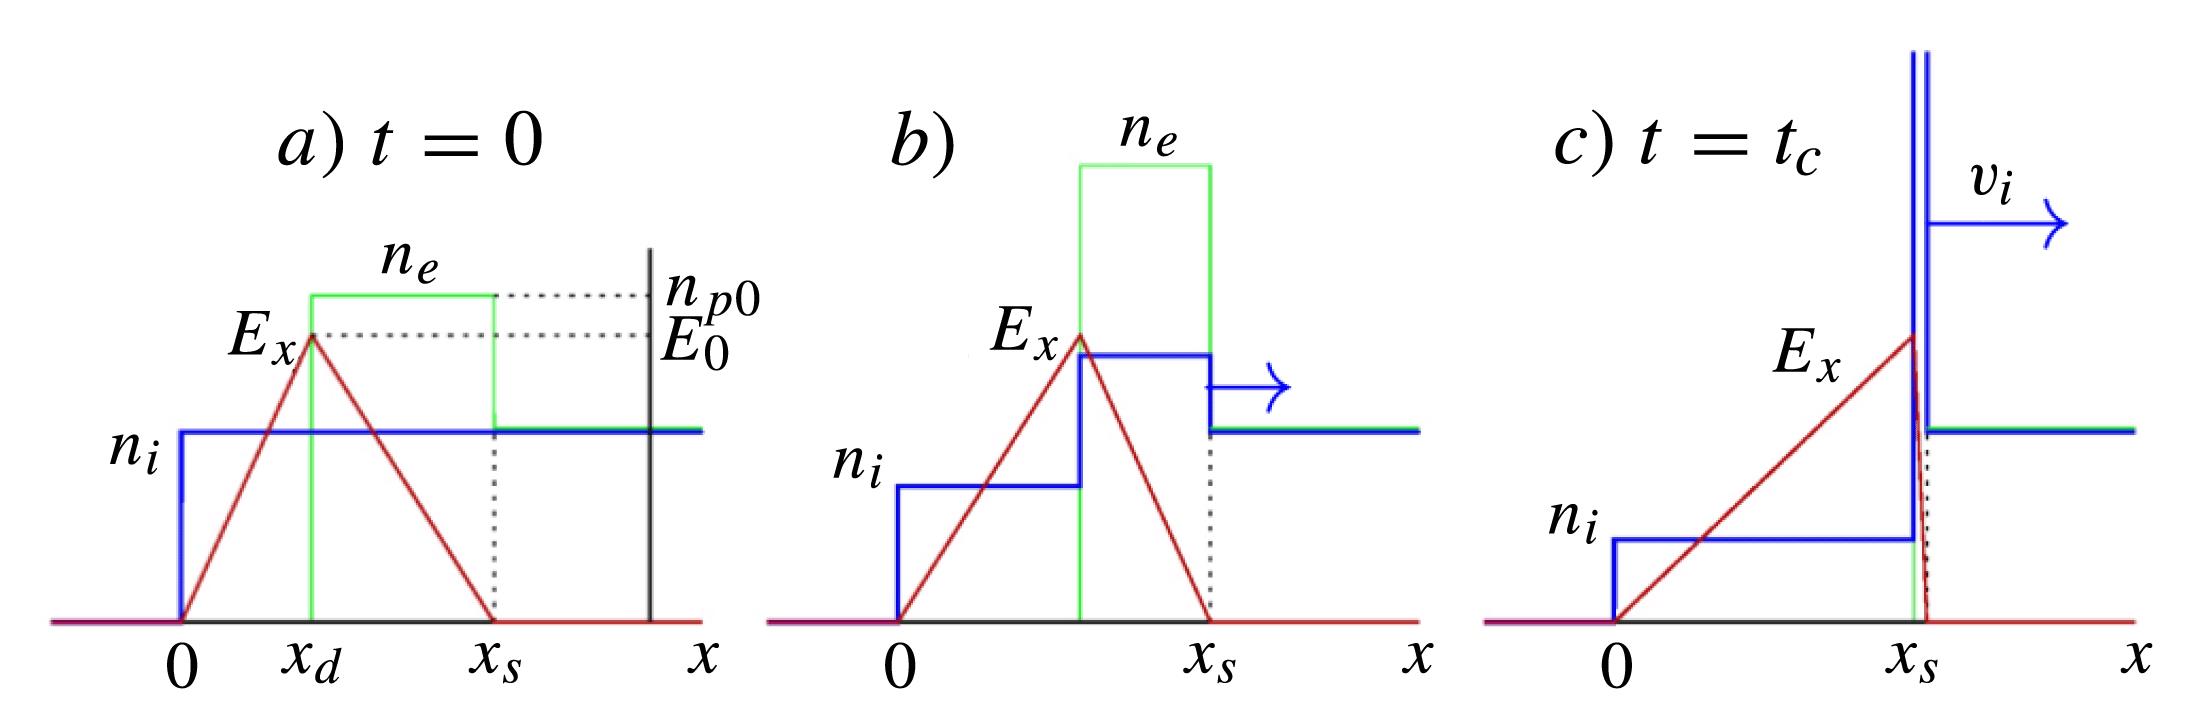 The first stage of ion acceleration driven by radiation pressure[18]. The densities of ions () and electrons () are approximated by step-like functions. Ions initially in the layer are accelerated by the charge separation field up to velocity at time .